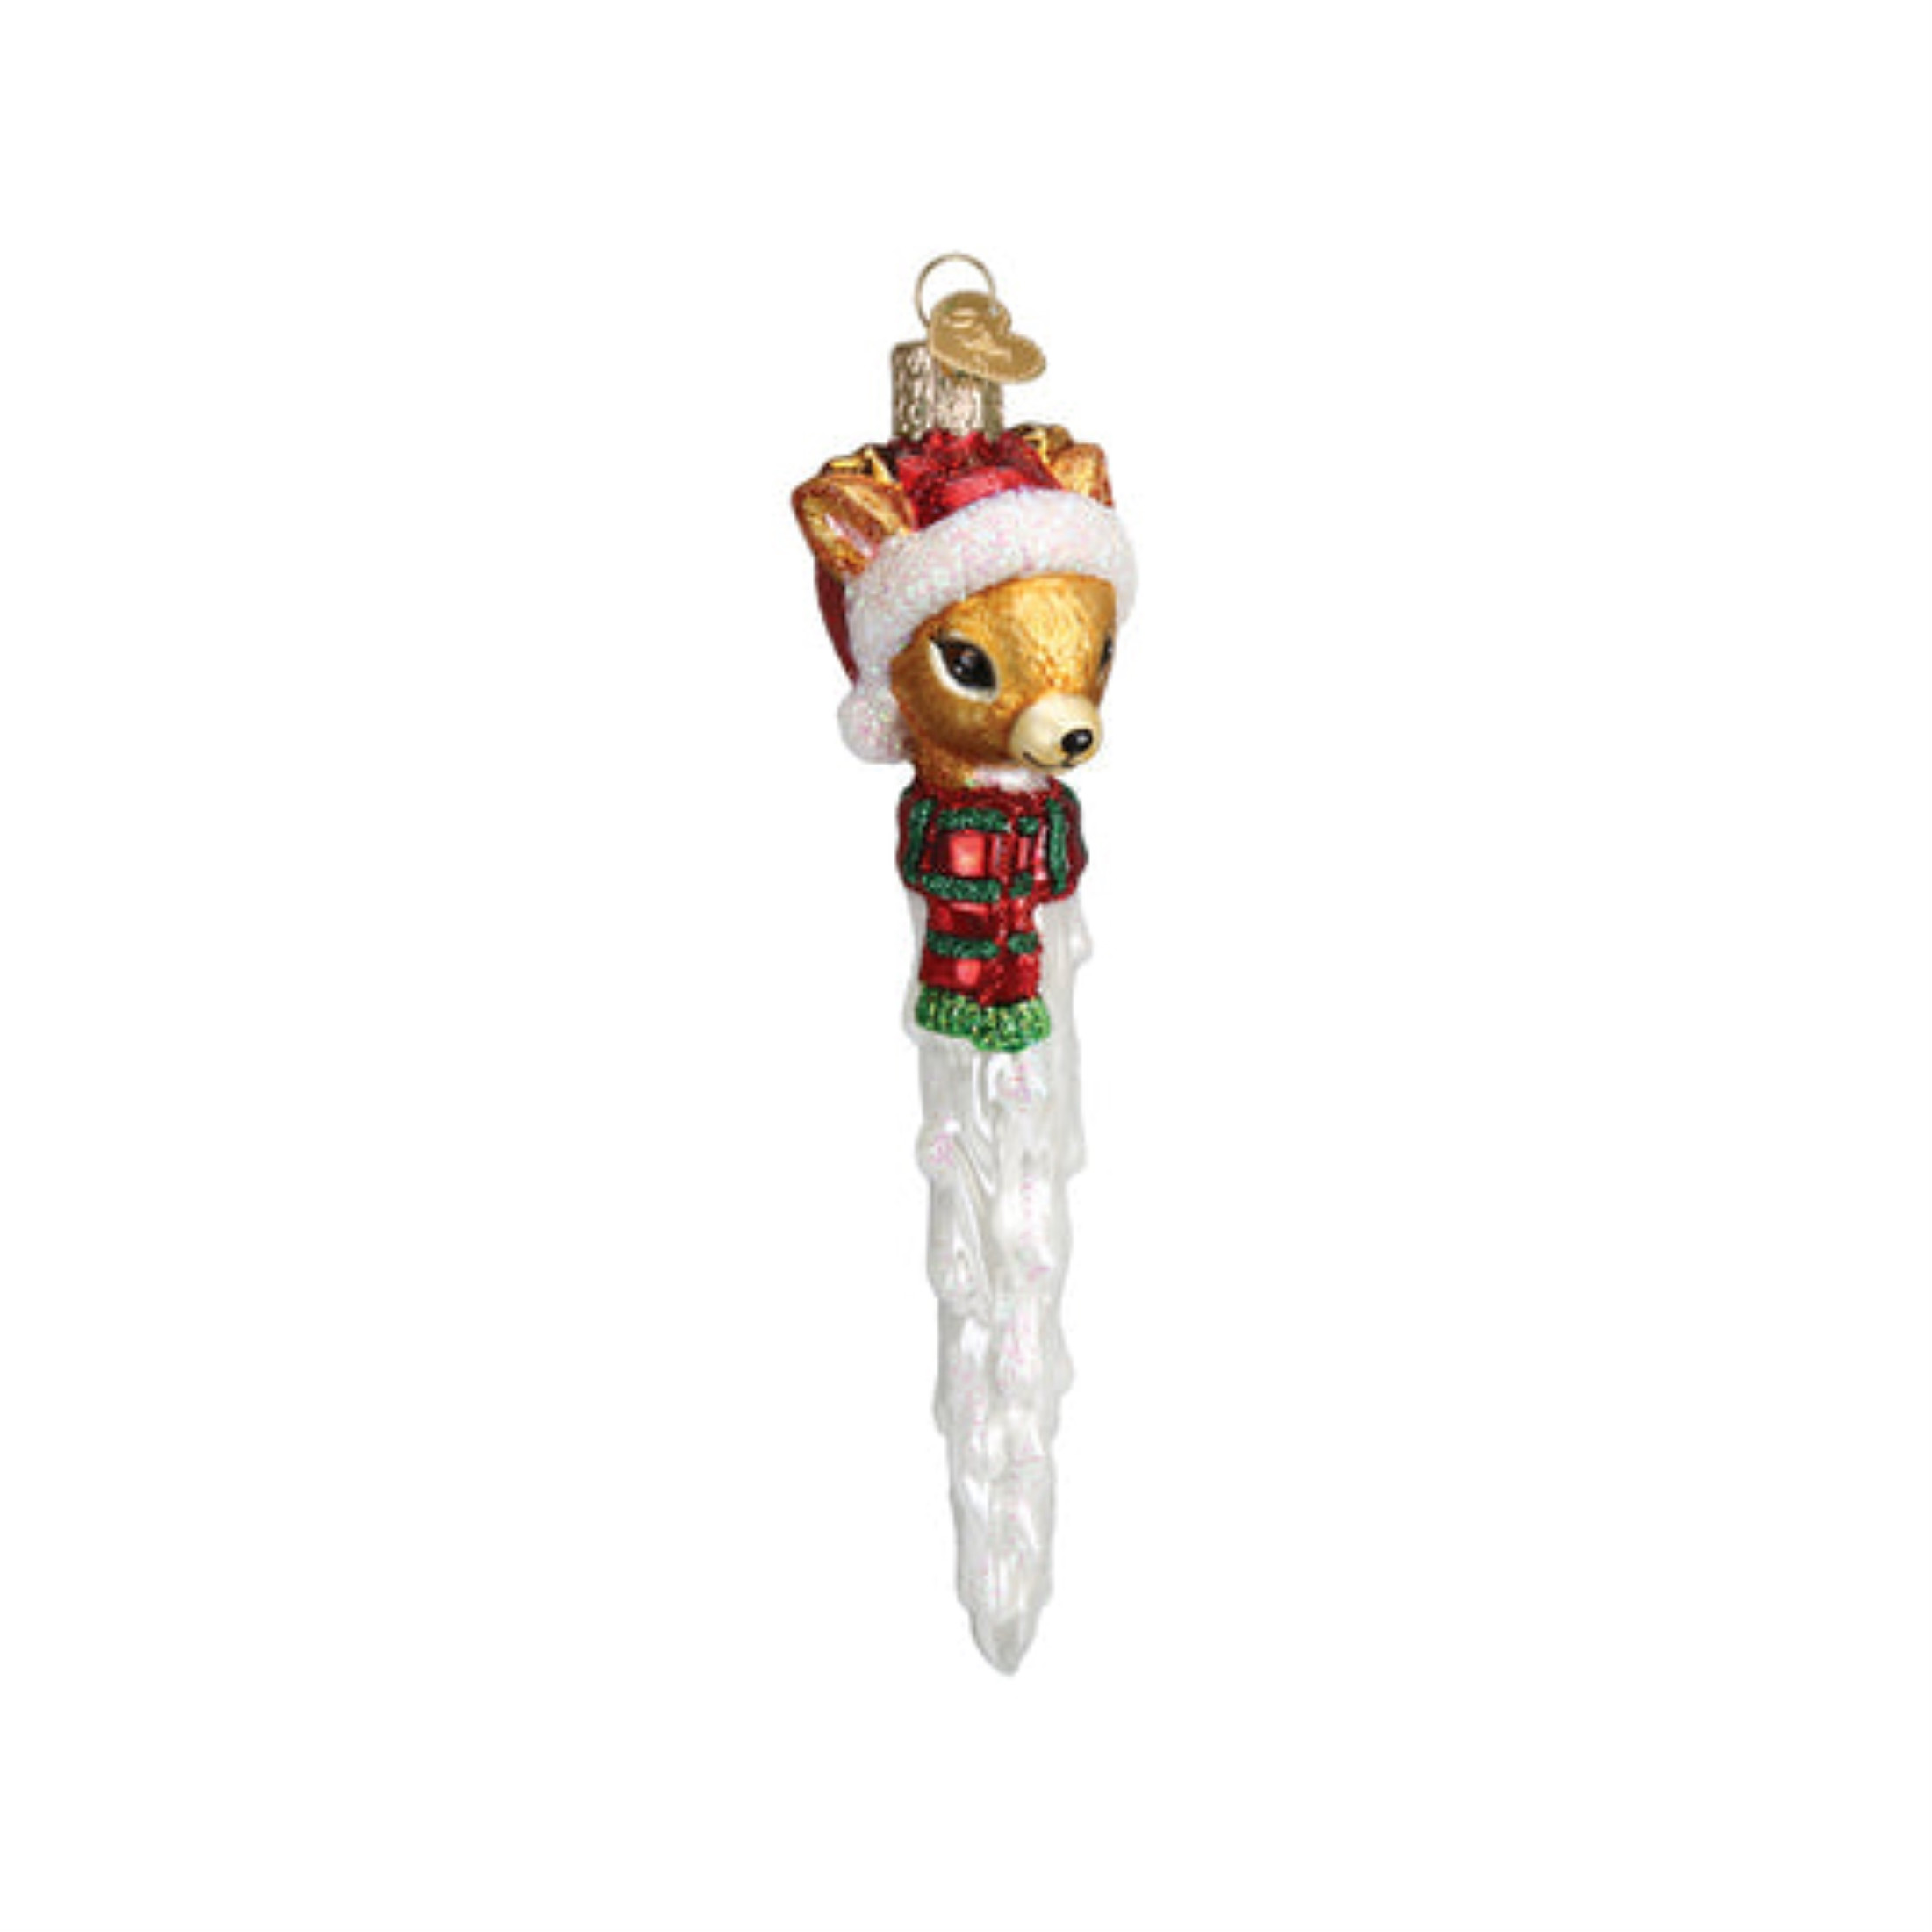 Old World Christmas Glass Blown Holiday Ornament For Tree, Reindeer Icicle (With OWC Gift Box)